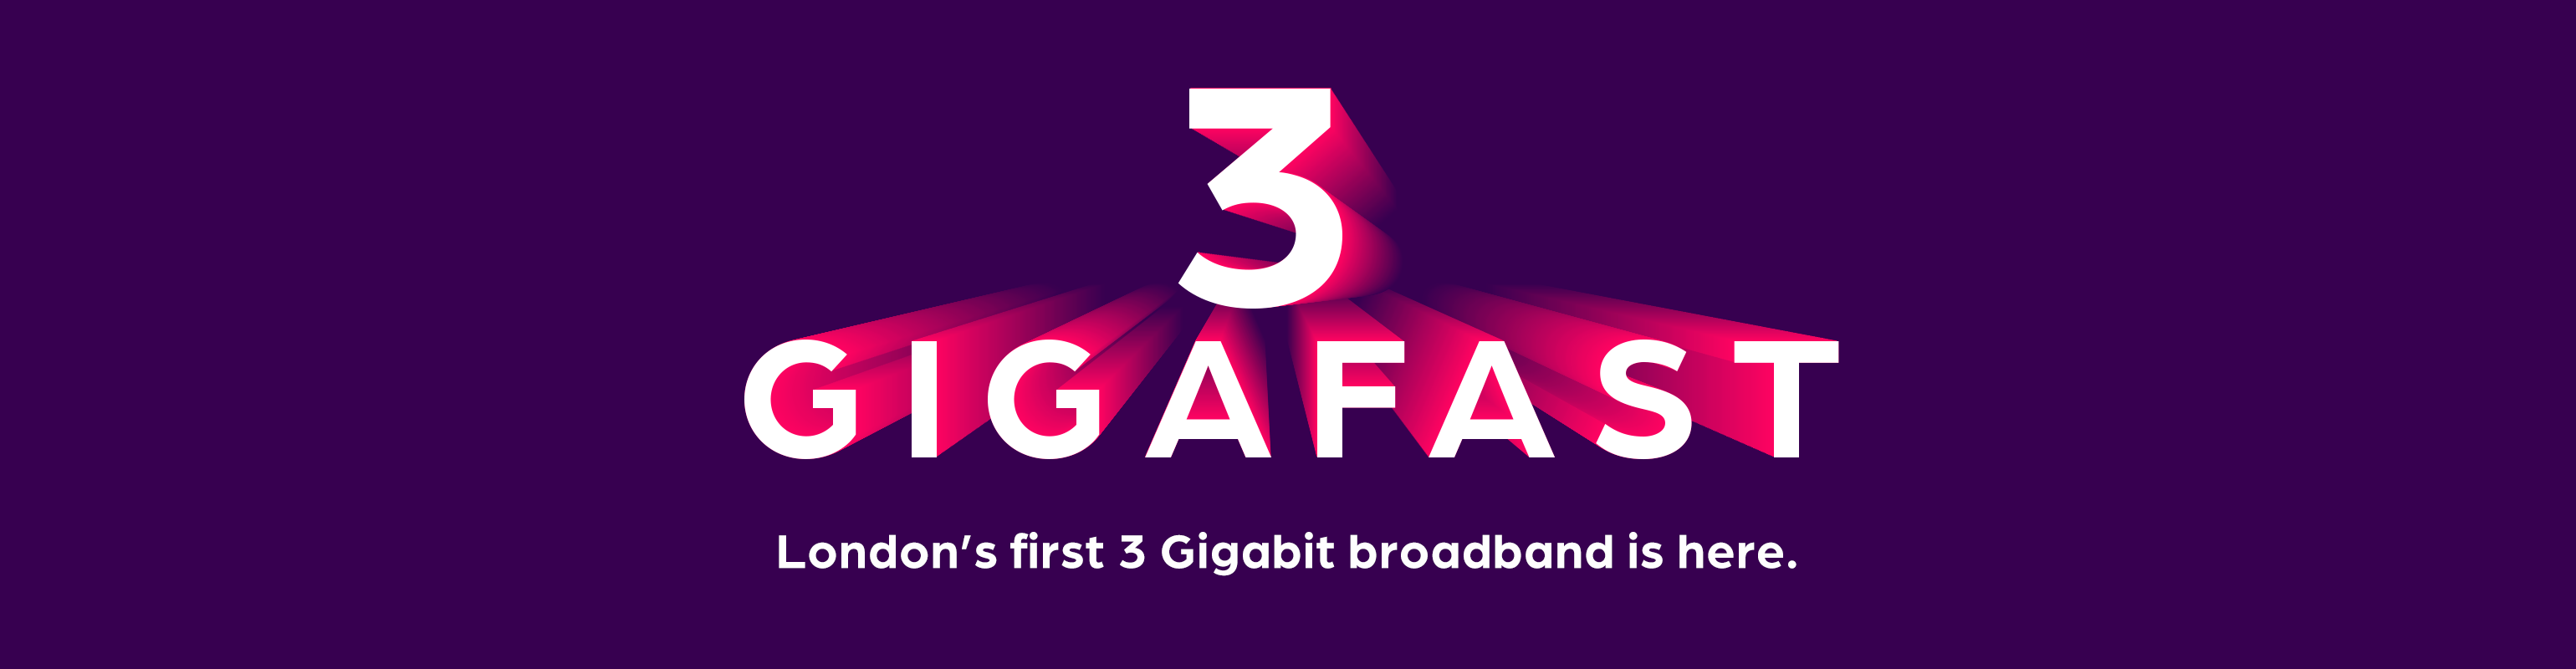 Community Fibre breaks speed record – launching the fastest home broadband package in London